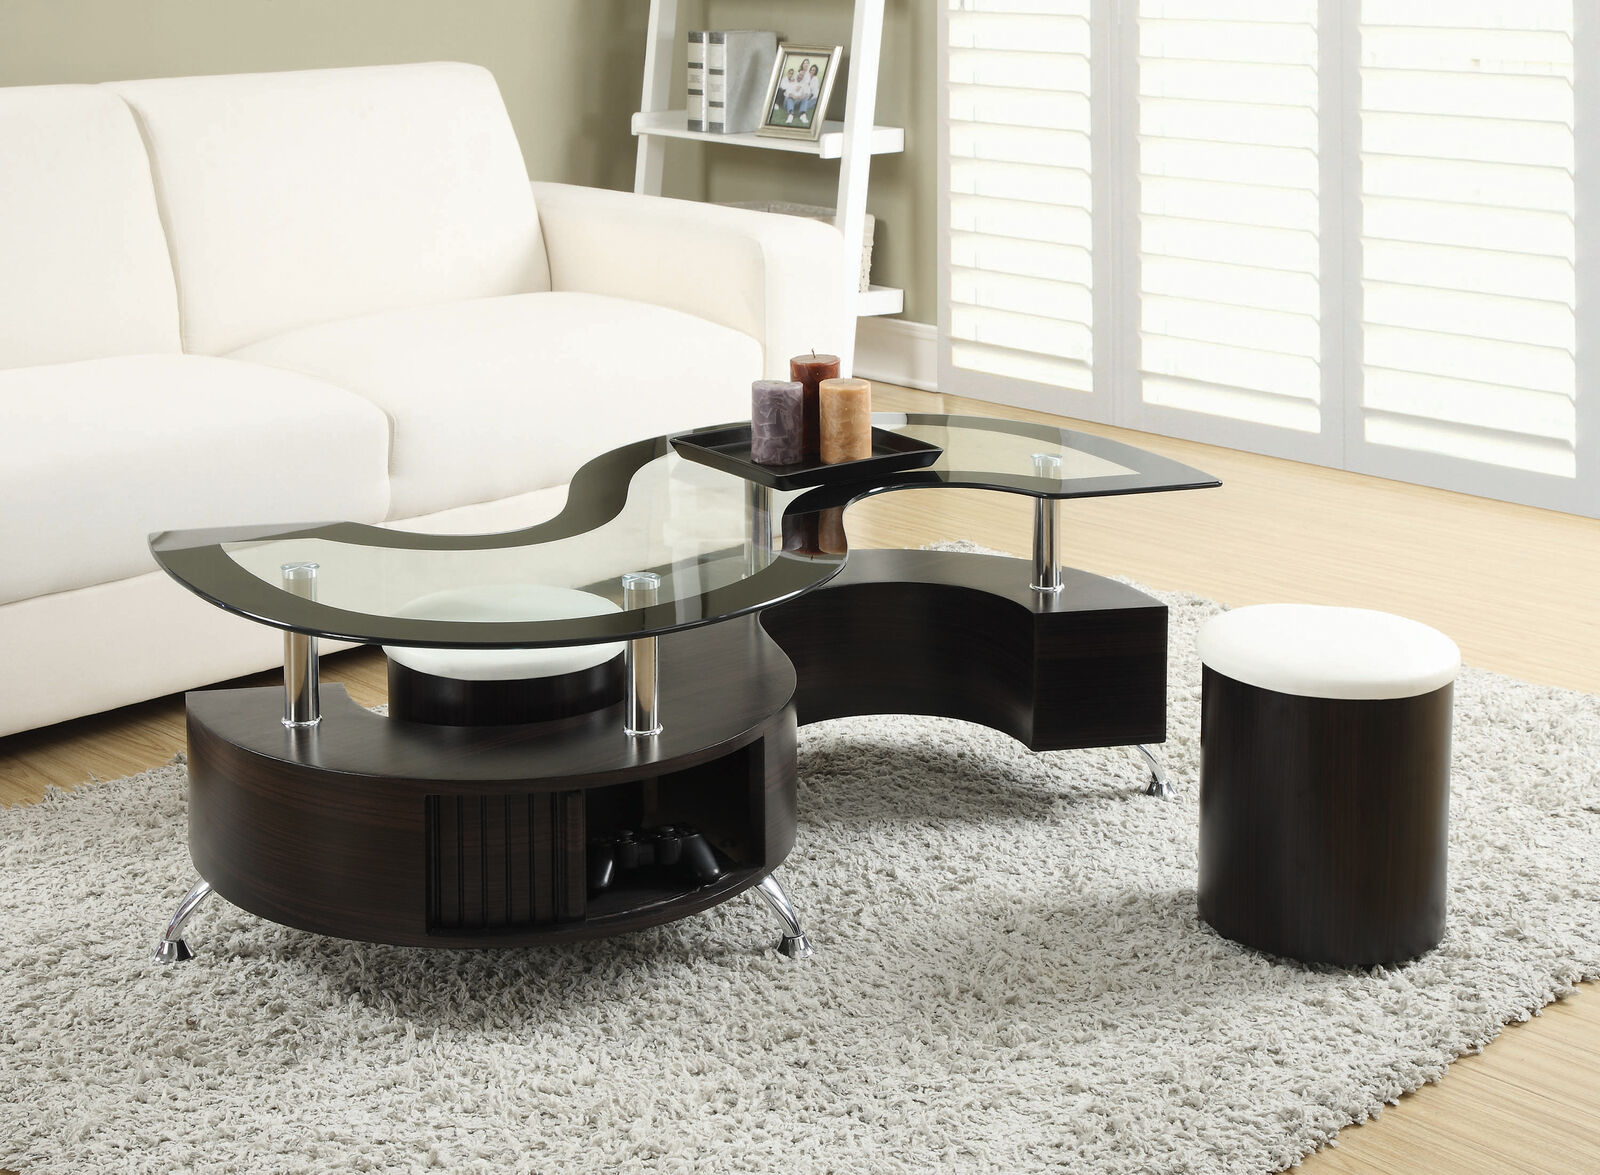 3-Piece Contemporary Delange Coffee Table And Stools Set Cappuccino